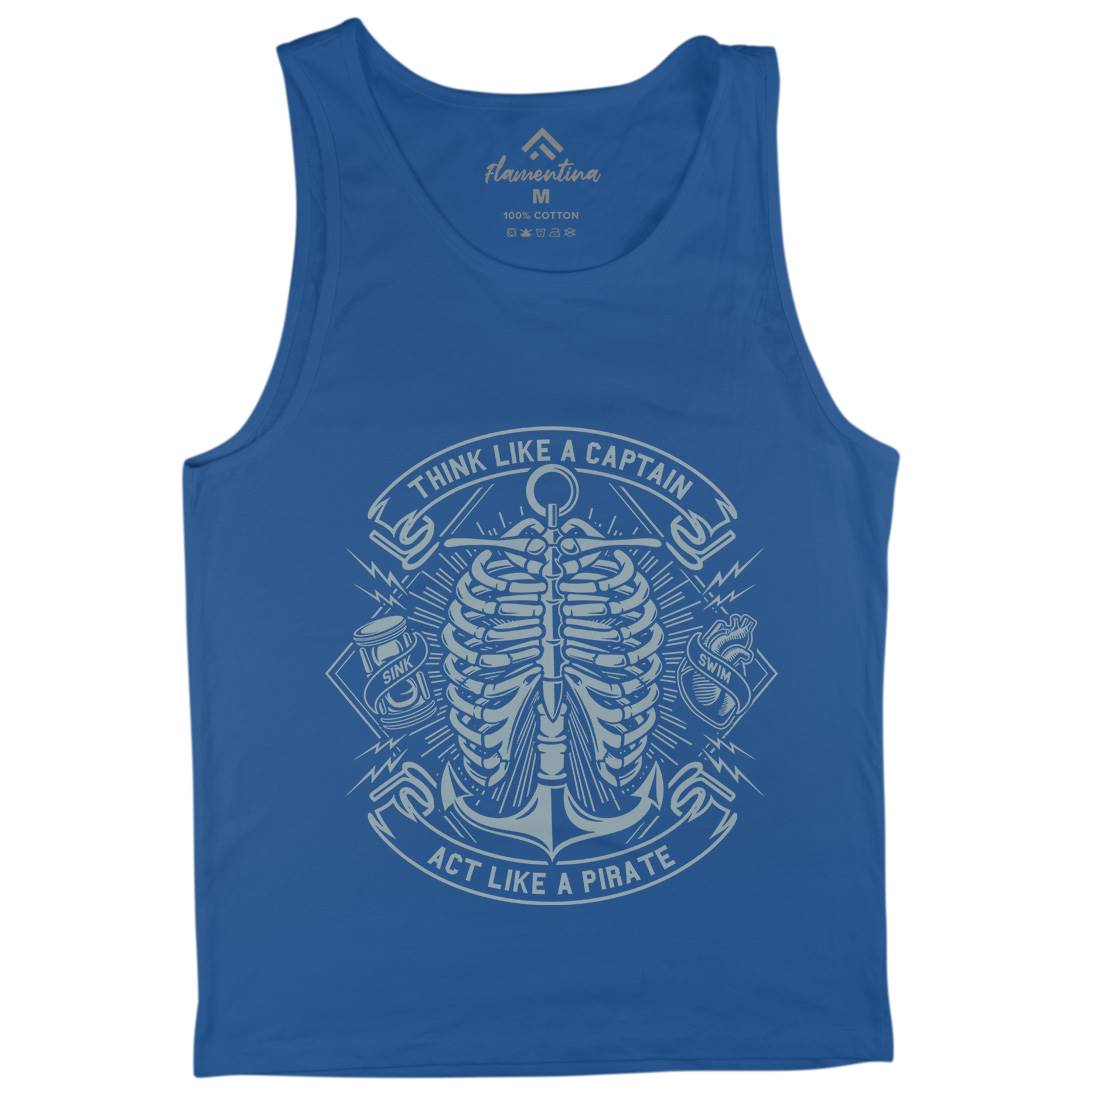 Think Like A Captain Mens Tank Top Vest Navy A293